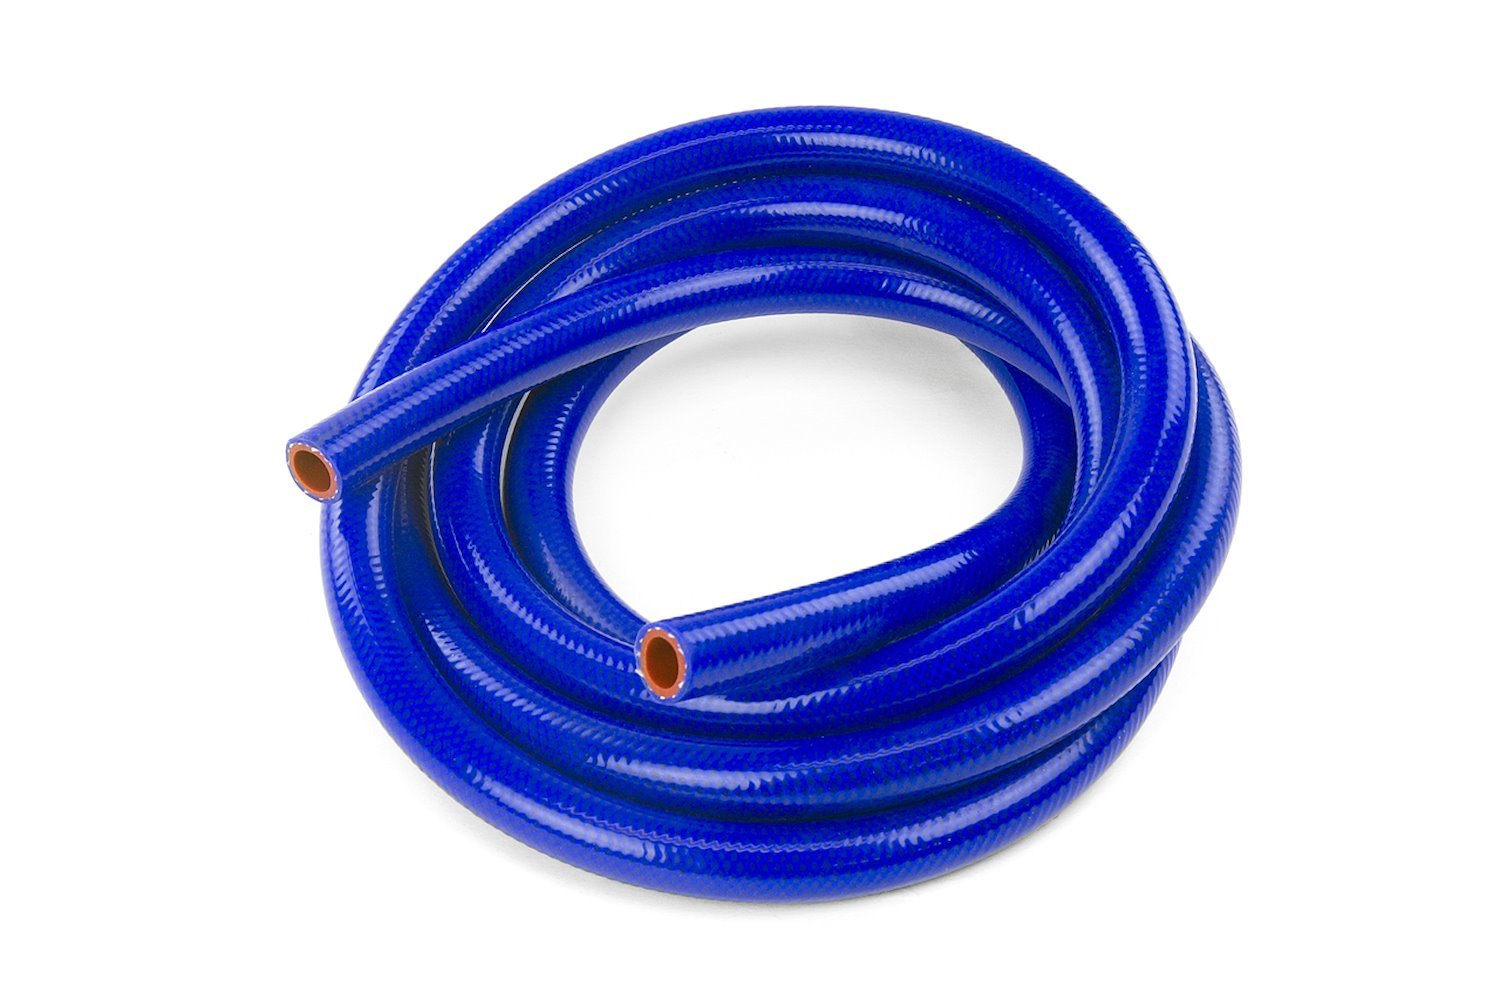 HTHH-087-BLUEx10 Silicone Heater Hose Tubing, High-Temp 1-Ply Reinforced, 7/8 in. ID, 10 ft. Roll, Blue